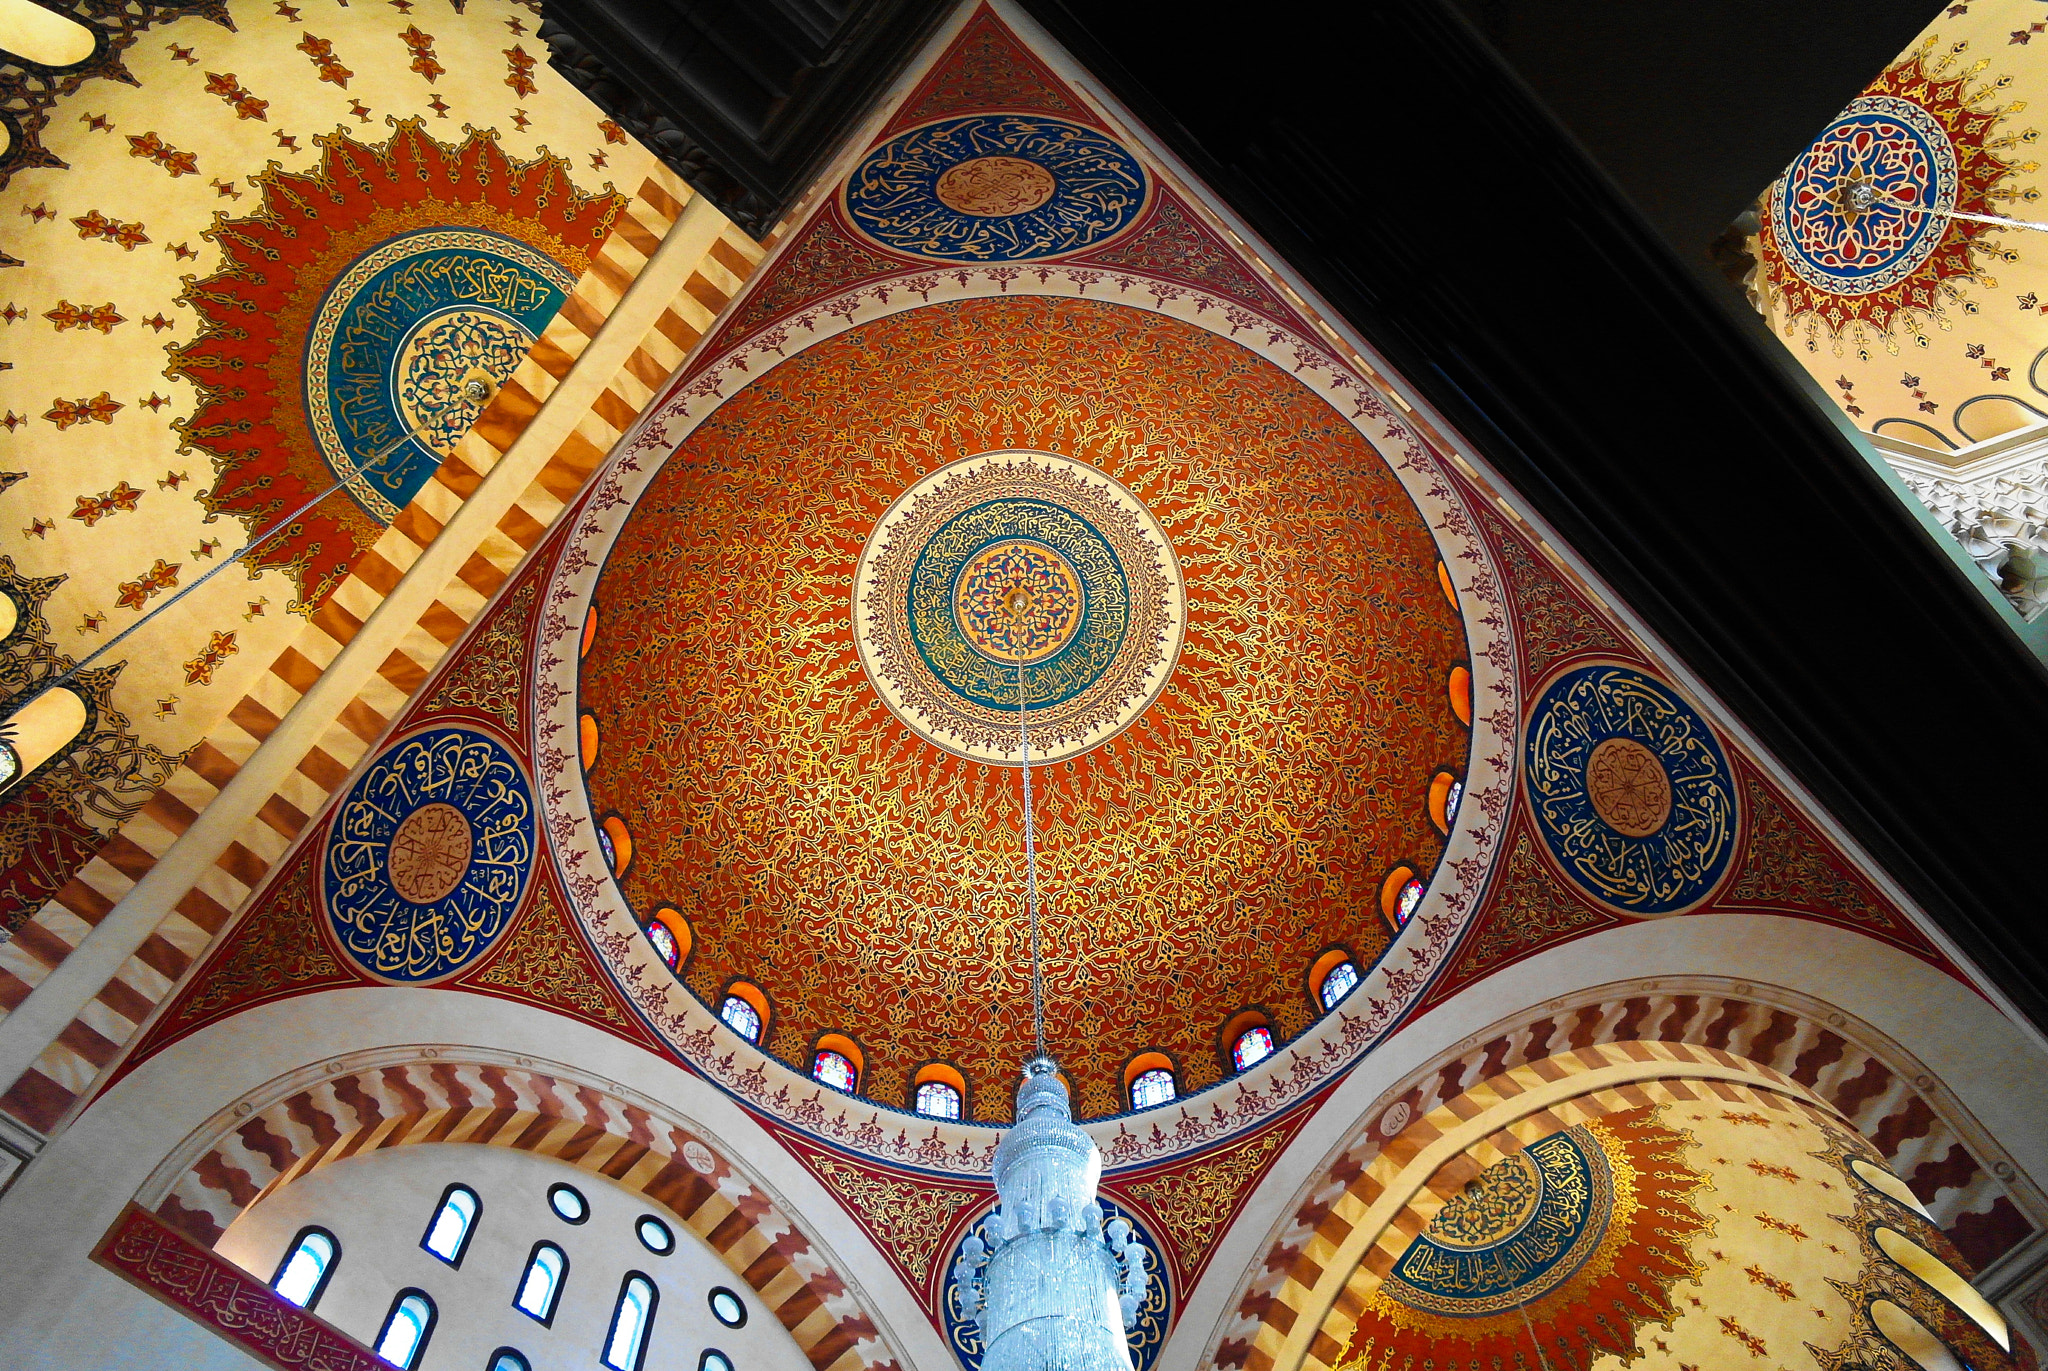 Samsung NX11 sample photo. Interior view to mosaic ceiling of mohammad al-amin mosque, beirut, lebanon photography